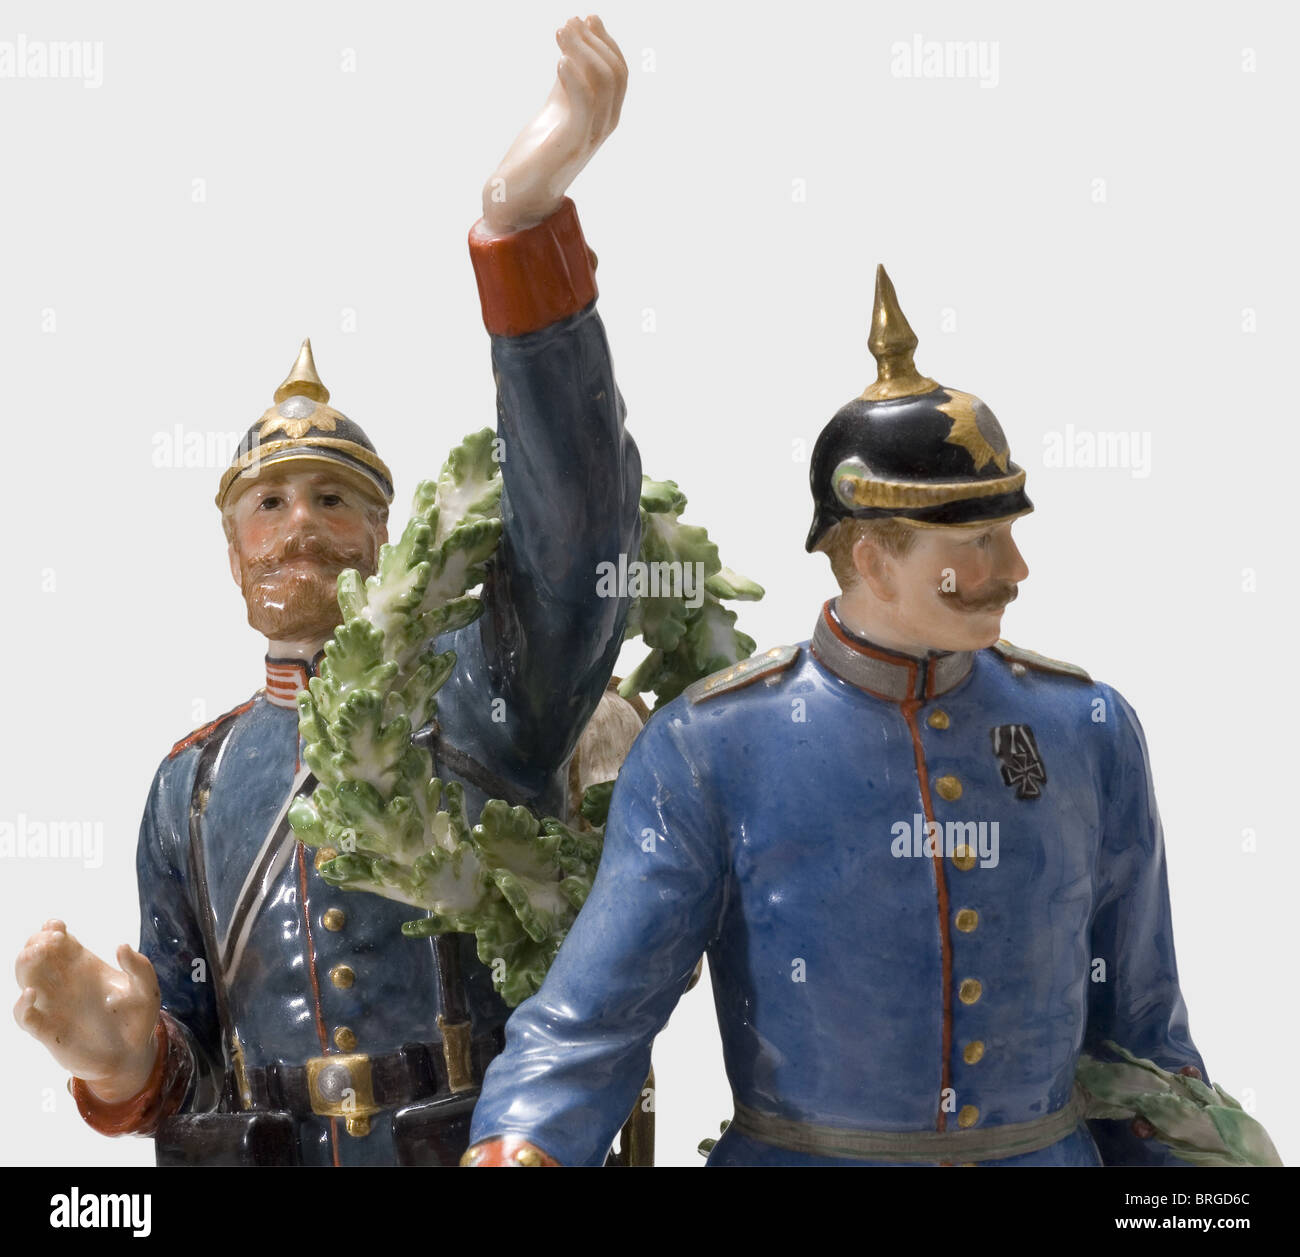 The Glorious Homecoming of the Victors 1871,a group of figurines manufactured by Meissen Porcelain,colour-composed,finely hand painted.Very detailed depiction of an officer of the Royal Saxon 1st Life Guard Grenadier Regiment No.100 and a grenadier of the 2nd Grenadier Regiment No.101 Kaiser Wilhelm decorated with laurel and oak leaf wreaths.The plinth adorned with roses and rocaille work,the base with swords mark in underglaze blue,a "P 183" scratch mark and press number "94".Height 27.5 cm.Very rare and in excellent condition.Cf.Hermann Historica,Additional-Rights-Clearences-Not Available Stock Photo